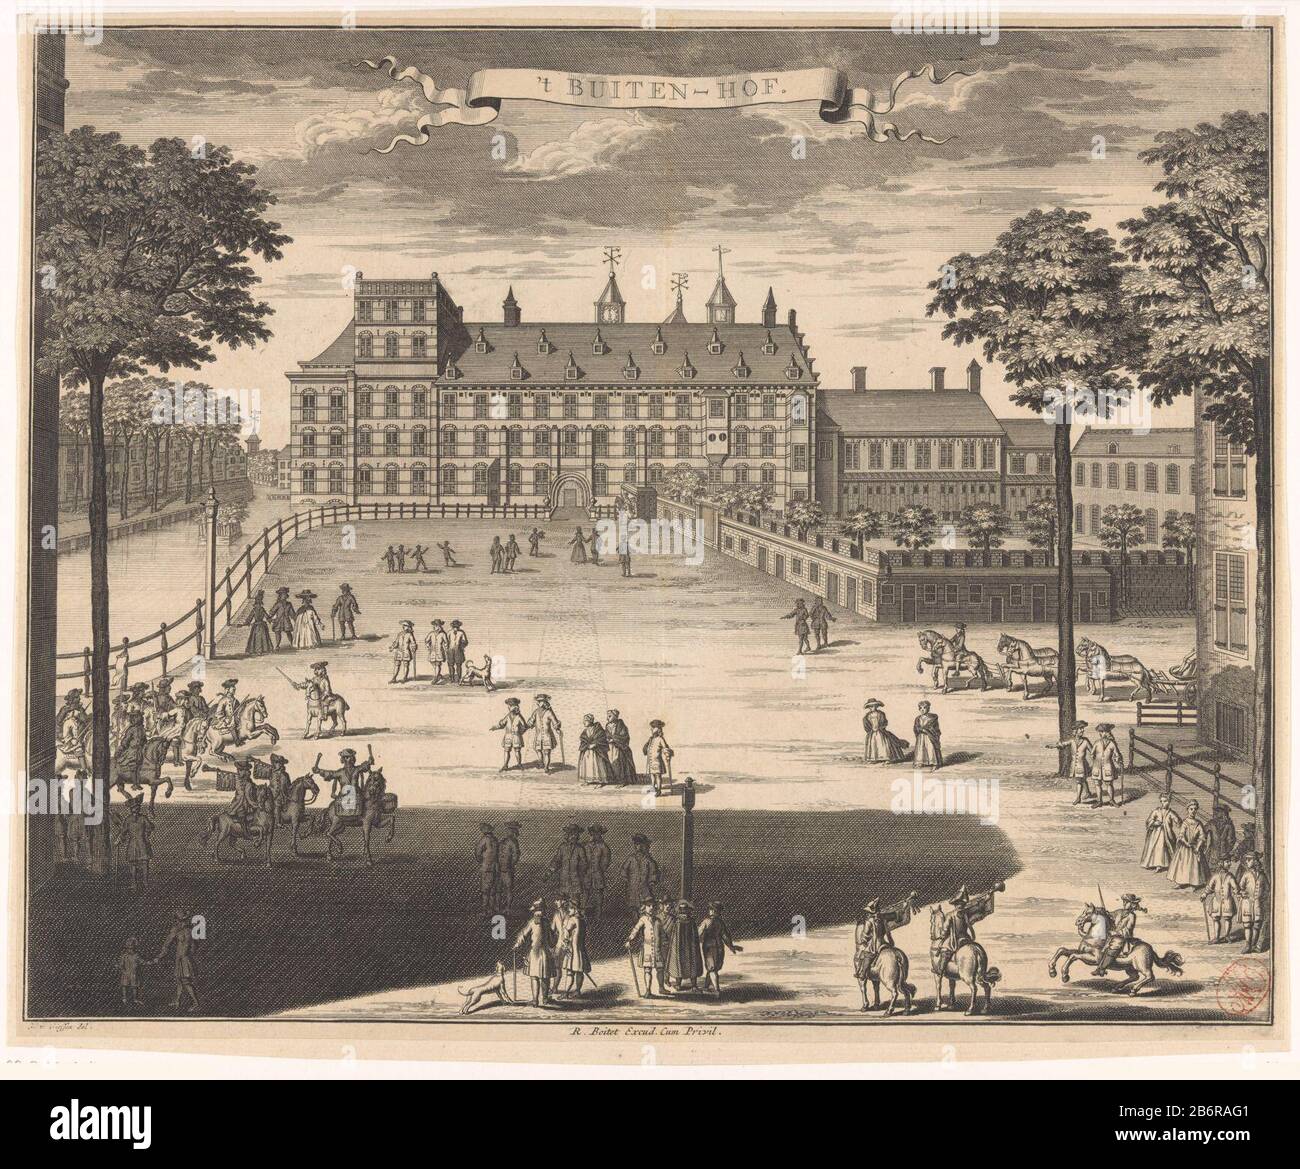 Gezicht op het Buitenhof te Den Haag 't Buiten-hof (titel op object) View of the Buitenhof, the Hague, in the background the Courtyard. On the Buitenhof several figures and ruiters. Manufacturer : print maker: anonymously to drawing of: Gerrit van Giessen (indicated on object) publisher: Reinier Boitet (indicated on object) publisher: Adrianus Douci Pietersz Grantor of privilege: unknown (indicated on object) Place manufacture: to order of: The Hague Publisher: Delft Publisher: Amsterdam Date: 1730 - 1736 Material: paper Technique: etching / engra (printing process) Measurements: sheet: h 281 Stock Photo